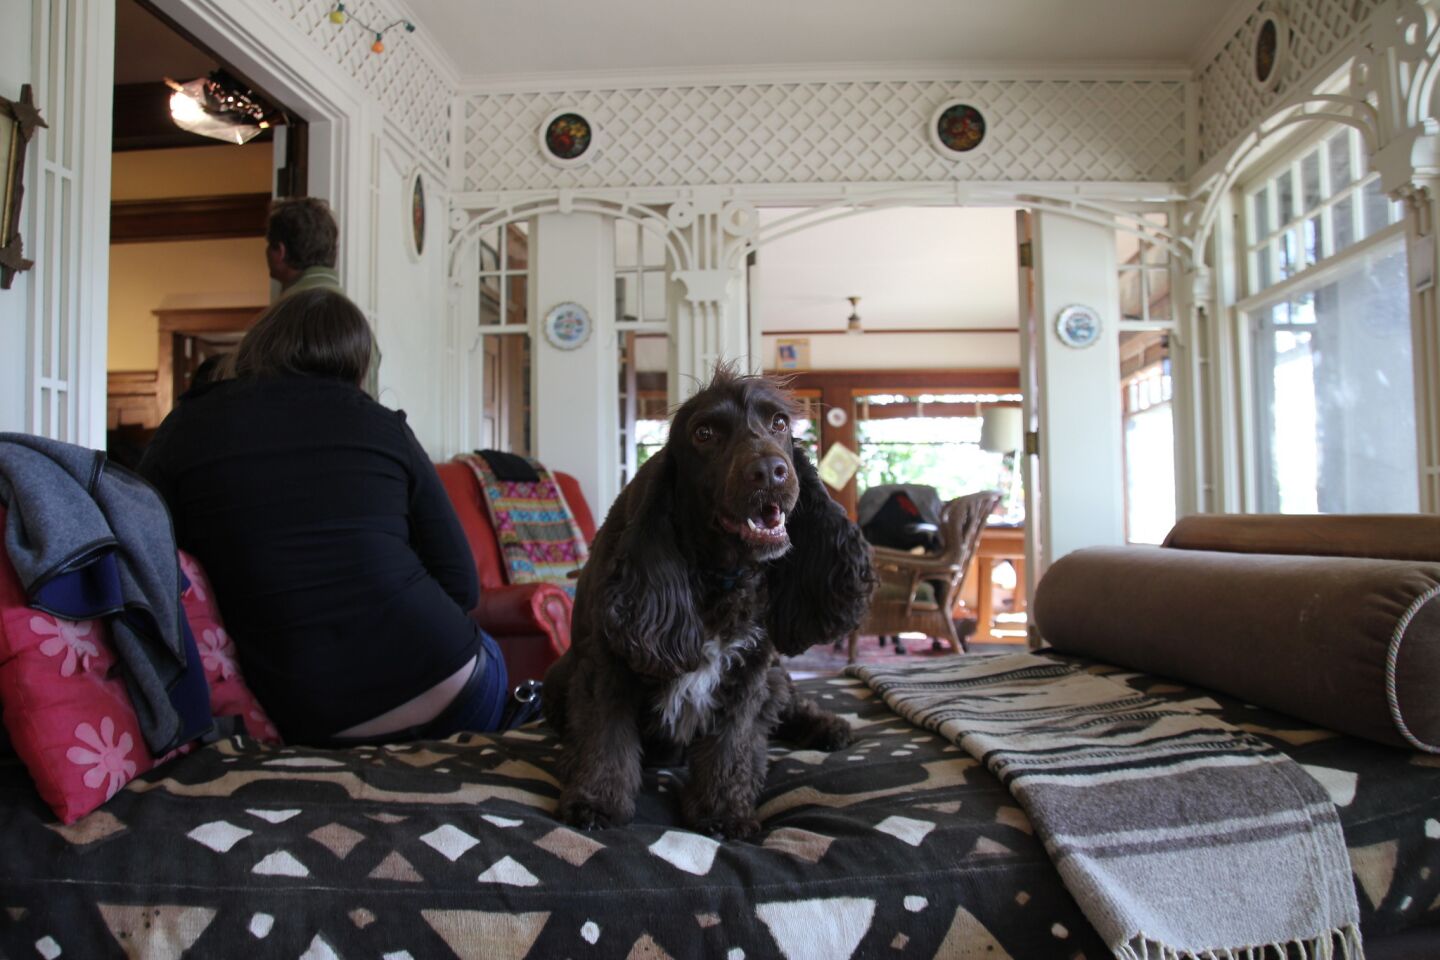 Once inside, you are liable to greeted by a field spaniel or three, who welcome visitors with tail wags and cuddles.